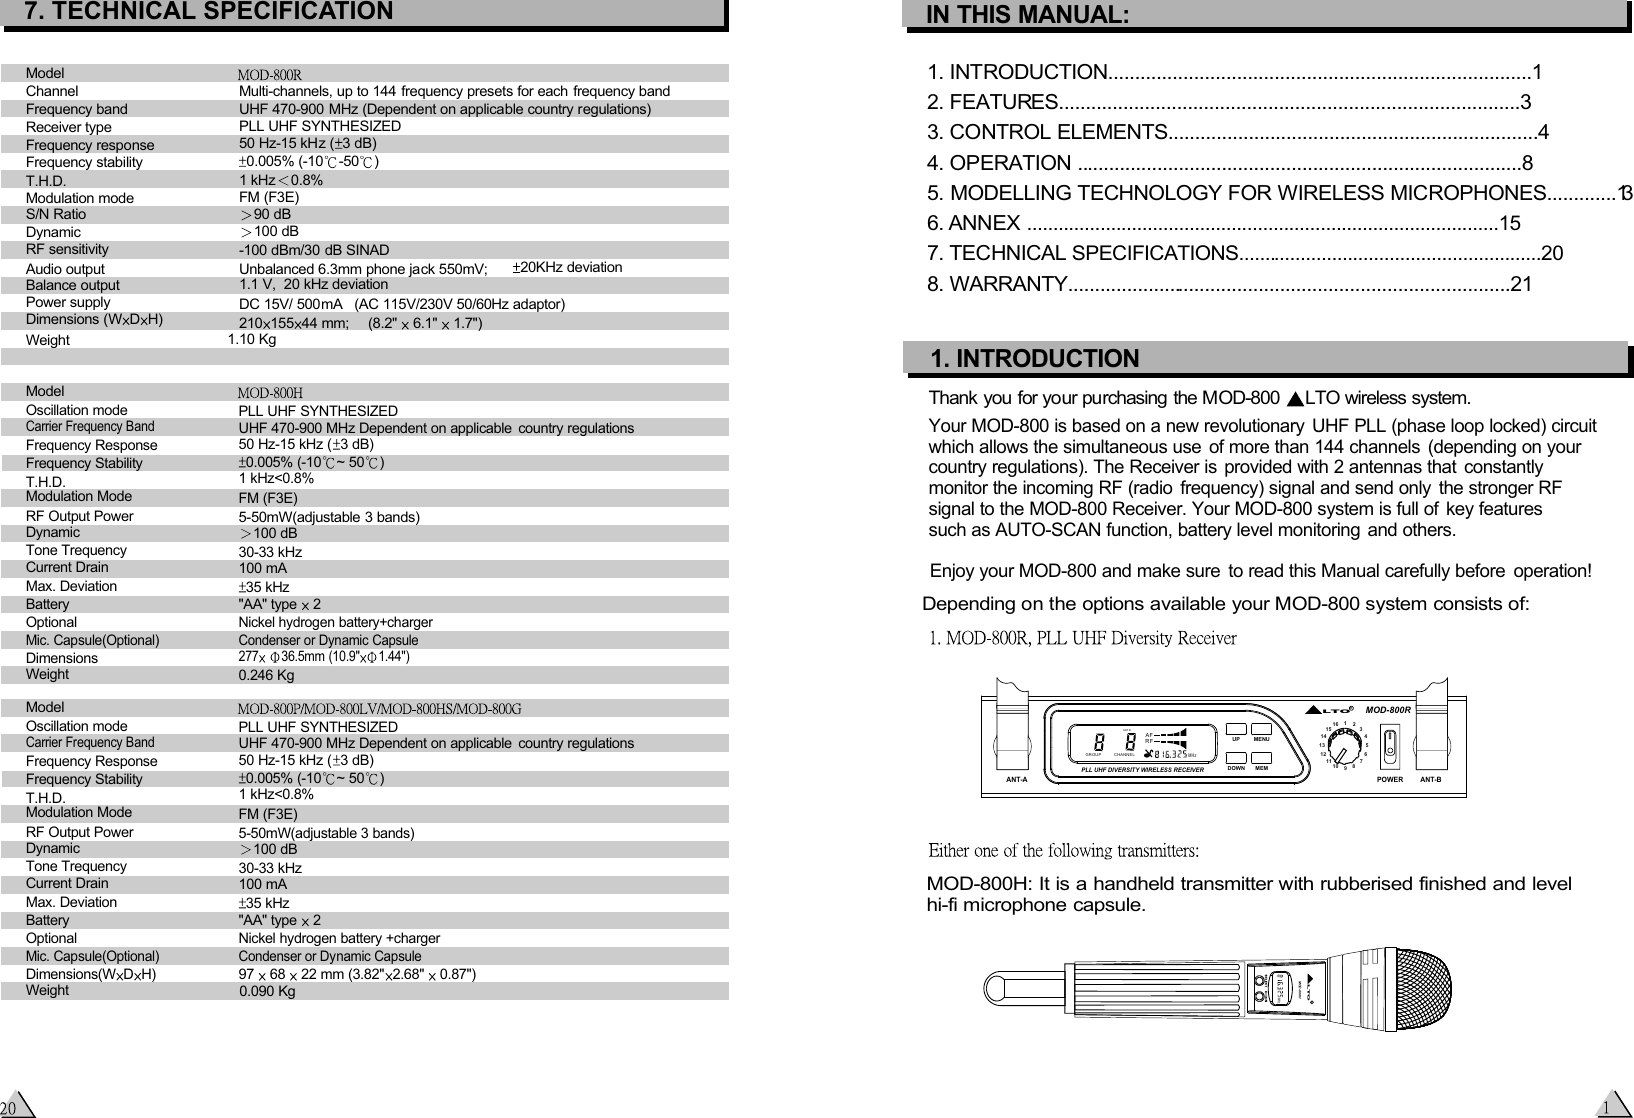 IN THIS MANUAL:1. INTRODUCTION...............................................................................12. FEATURES......................................................................................33. CONTROL ELEMENTS.....................................................................44. OPERATION ...................................................................................85. MODELLING TECHNOLOGY FOR WIRELESS MICROPHONES.............136. ANNEX ..........................................................................................157. TECHNICAL SPECIFICATIONS..........................................................208. WARRANTY...................................................................................211. INTRODUCTIONEnjoy your MOD-800 and make sure  to read this Manual carefully before  operation! Thank you for your purchasing the MOD-800  LTO wireless system.Your MOD-800 is based on a new revolutionary  UHF PLL (phase loop locked) circuit  which allows the simultaneous use  of more than 144 channels  (depending on your country regulations). The Receiver is provided with 2 antennas that  constantly monitor the incoming RF (radio  frequency) signal and send only  the stronger RF signal to the MOD-800 Receiver. Your MOD-800 system is full of  key features such as AUTO-SCAN function, battery level monitoring and others. MOD-800H: It is a handheld transmitter with rubberised finished and level hi-fi microphone capsule.    Depending on the options available your MOD-800 system consists of:ANT BGROUP CHANNELAFRFMHzMOD-800RANT-A ANT-BPOWERRLTOPLL UHF DIVERSITY WIRELESS RECEIVERUP MENUDOWN MEM 10 8911211 745632131415167. TECHNICAL SPECIFICATIONModelChannelFrequency bandReceiver typeFrequency responseFrequency stabilityT.H.D.Modulation modeS/N RatioDynamicRF sensitivityAudio outputBalance outputPower supplyDimensions (WDH) WeightMulti-channels, up to 144 frequency presets for each frequency bandUHF 470-900 MHz (Dependent on applicable country regulations)PLL UHF SYNTHESIZED50 Hz-15 kHz ( 3 dB)0.005% (-10 -50 )1 kHz 0.8%FM (F3E)90 dB100 dB-100 dBm/30 dB SINADUnbalanced 6.3mm phone jack 550mV; 20KHz deviation1.1 V,  20 kHz deviationDC 15V/ 500mA  (AC 115V/230V 50/60Hz adaptor)210 155 44 mm;  (8.2&quot;   6.1&quot;   1.7&quot;)              1.10 KgModelOscillation modeCarrier Frequency BandFrequency ResponseFrequency StabilityT.H.D.Modulation ModeRF Output PowerDynamicTone TrequencyCurrent DrainMax. DeviationBatteryOptionalMic. Capsule(Optional)DimensionsWeightPLL UHF SYNTHESIZEDUHF 470-900 MHz Dependent on applicable  country regulations50 Hz-15 kHz ( 3 dB)0.005% (-10 ~ 50 )FM (F3E)5-50mW(adjustable 3 bands)100 dB 30-33 kHz100 mA35 kHz &quot;AA&quot; type   2 Nickel hydrogen battery+chargerCondenser or Dynamic Capsule277  36.5mm (10.9&quot; 1.44&quot;) 0.246 Kg 1 kHz&lt;0.8%ModelOscillation modeCarrier Frequency BandFrequency ResponseFrequency StabilityT.H.D.Modulation ModeRF Output PowerDynamicTone TrequencyCurrent DrainMax. DeviationBatteryOptionalMic. Capsule(Optional)Dimensions(WDH) WeightPLL UHF SYNTHESIZEDUHF 470-900 MHz Dependent on applicable  country regulations50 Hz-15 kHz ( 3 dB)0.005% (-10 ~ 50 )FM (F3E)5-50mW(adjustable 3 bands)100 dB 30-33 kHz100 mA35 kHz &quot;AA&quot; type   2 Nickel hydrogen battery +chargerCondenser or Dynamic Capsule1 kHz&lt;0.8%0.090 Kg 97   68   22 mm (3.82&quot; 2.68&quot;   0.87&quot;)MOD-800HRLTOMHz